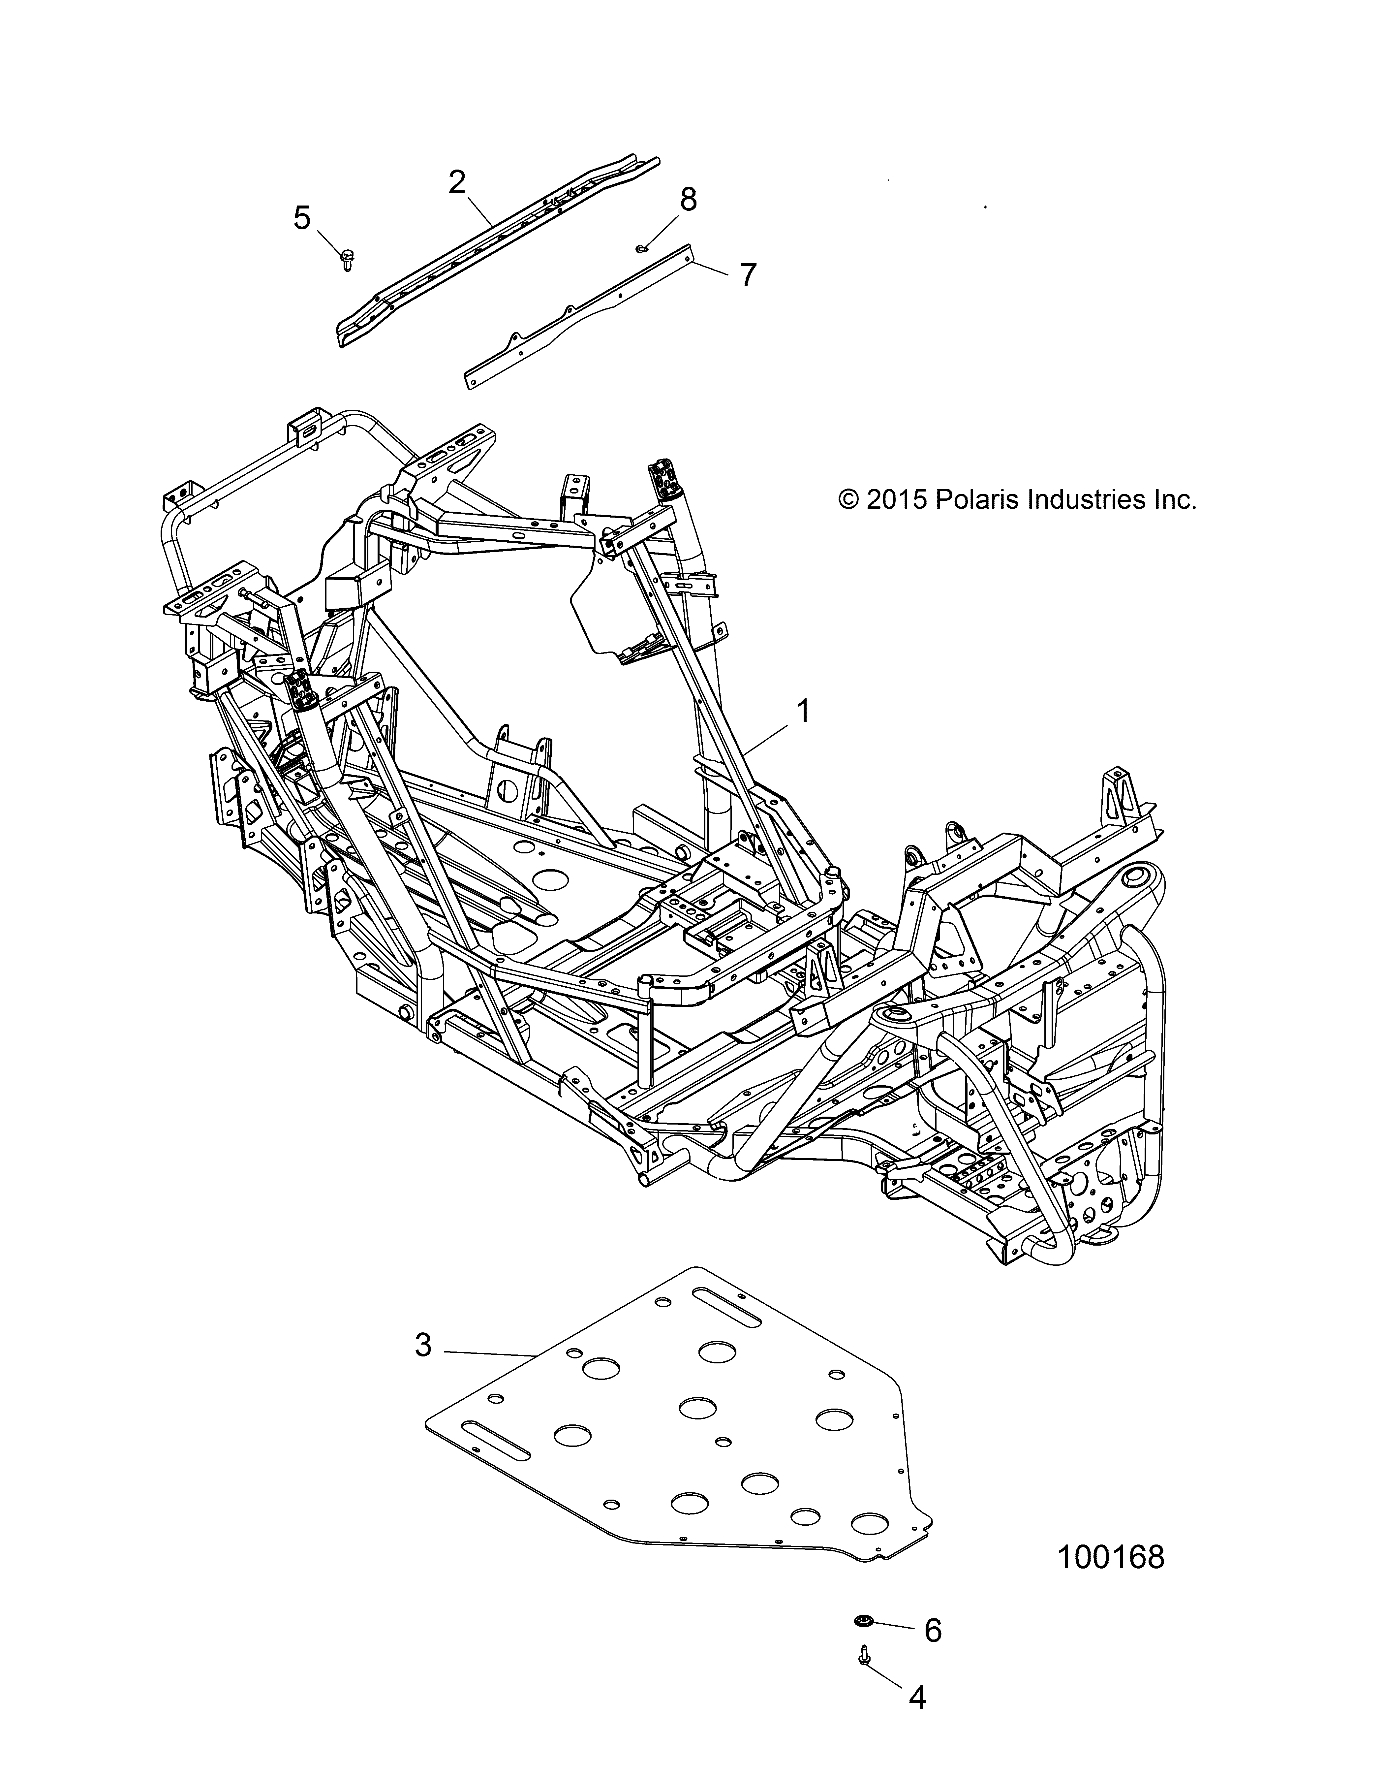 CHASSIS, MAIN FRAME AND SKID PLATE - A16DAA32A1/A7 (100168)